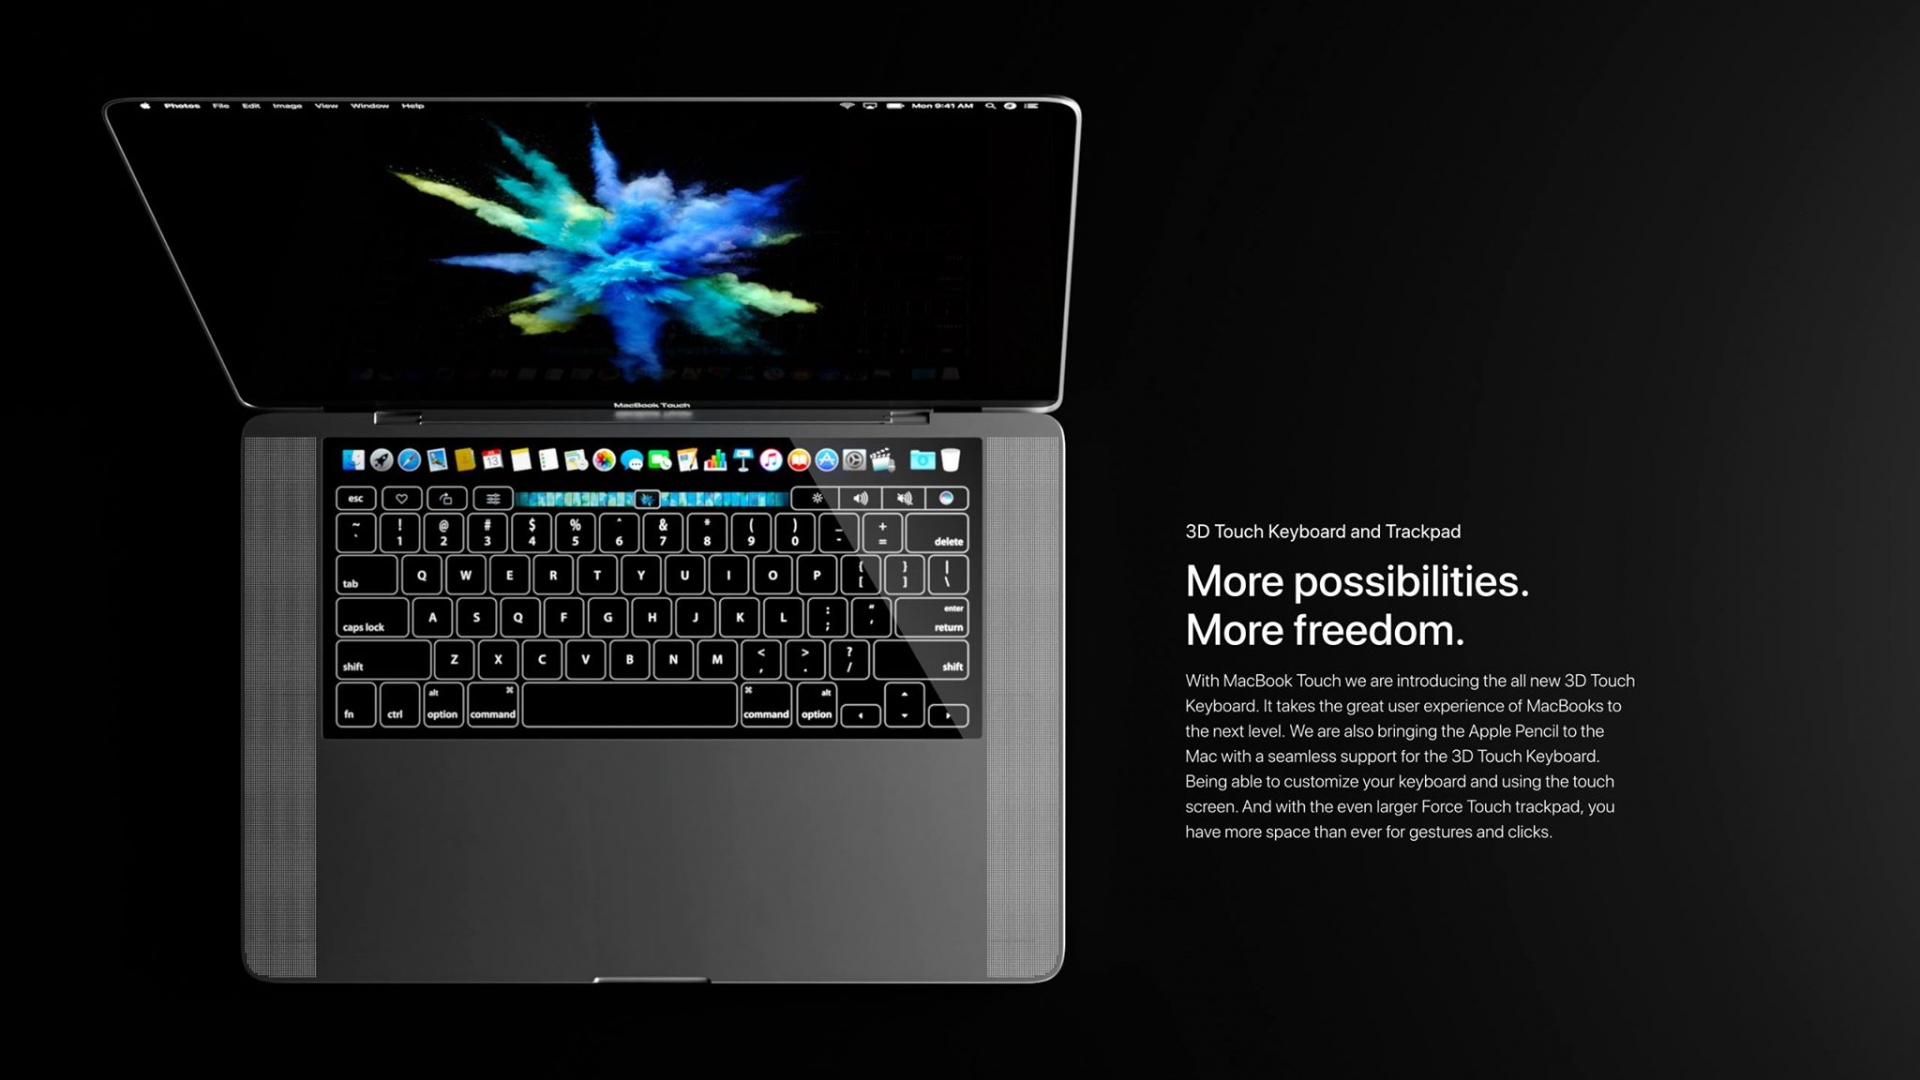 Macbook Touch Concept Image 2